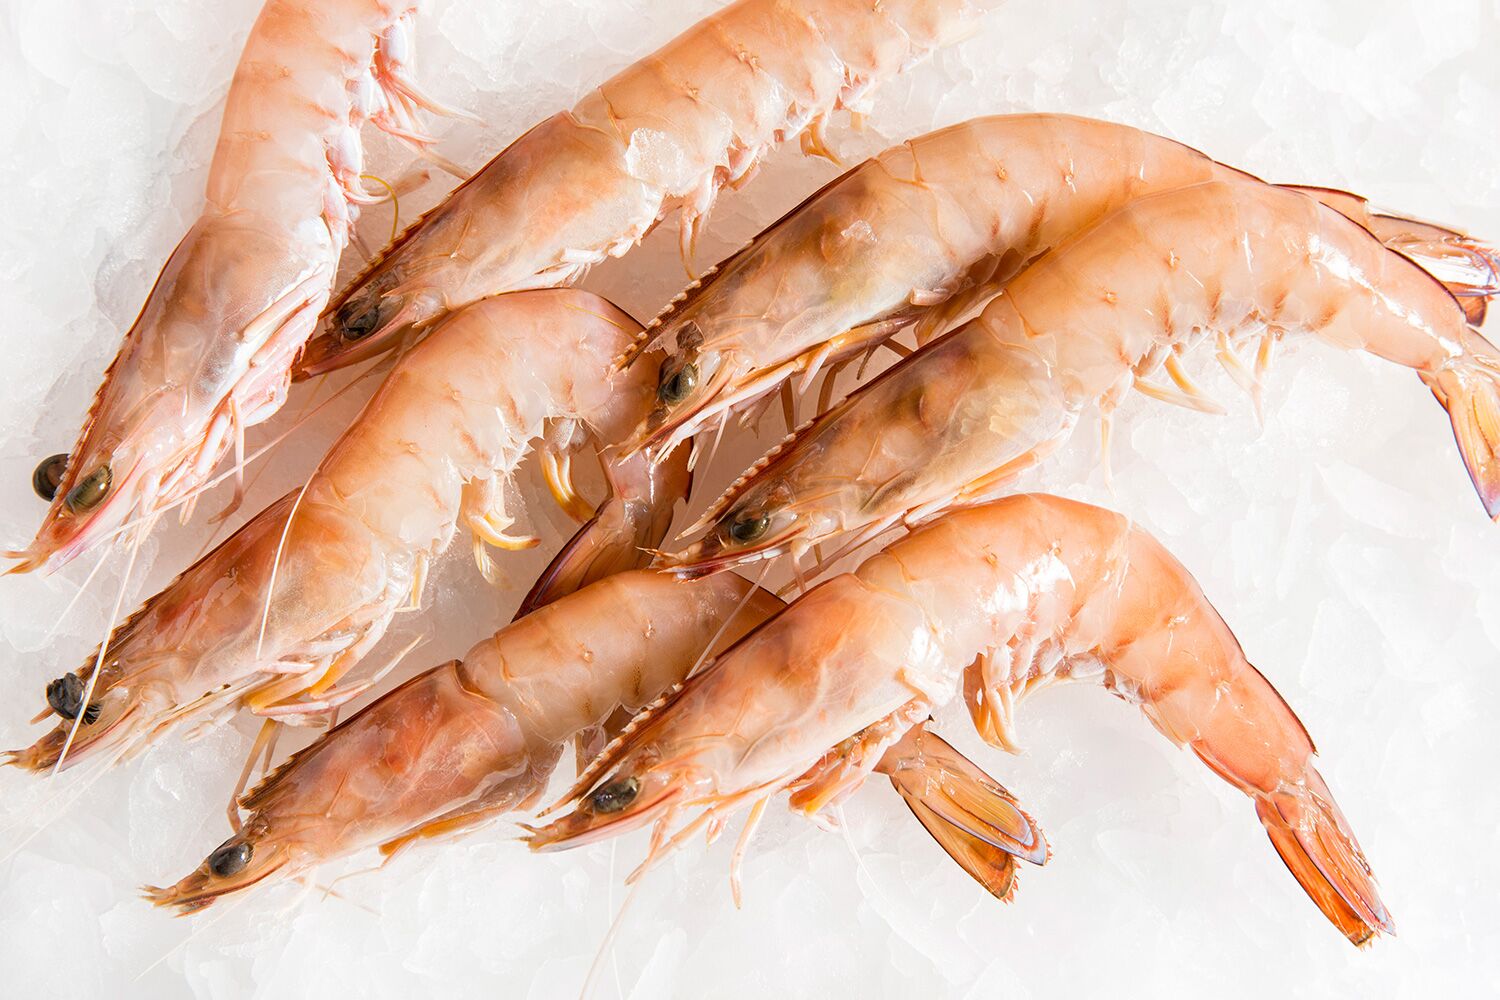 Prawn Market Report, Global Industry Overview, Growth, Trends, Opportunities and Forecast 2019-2024